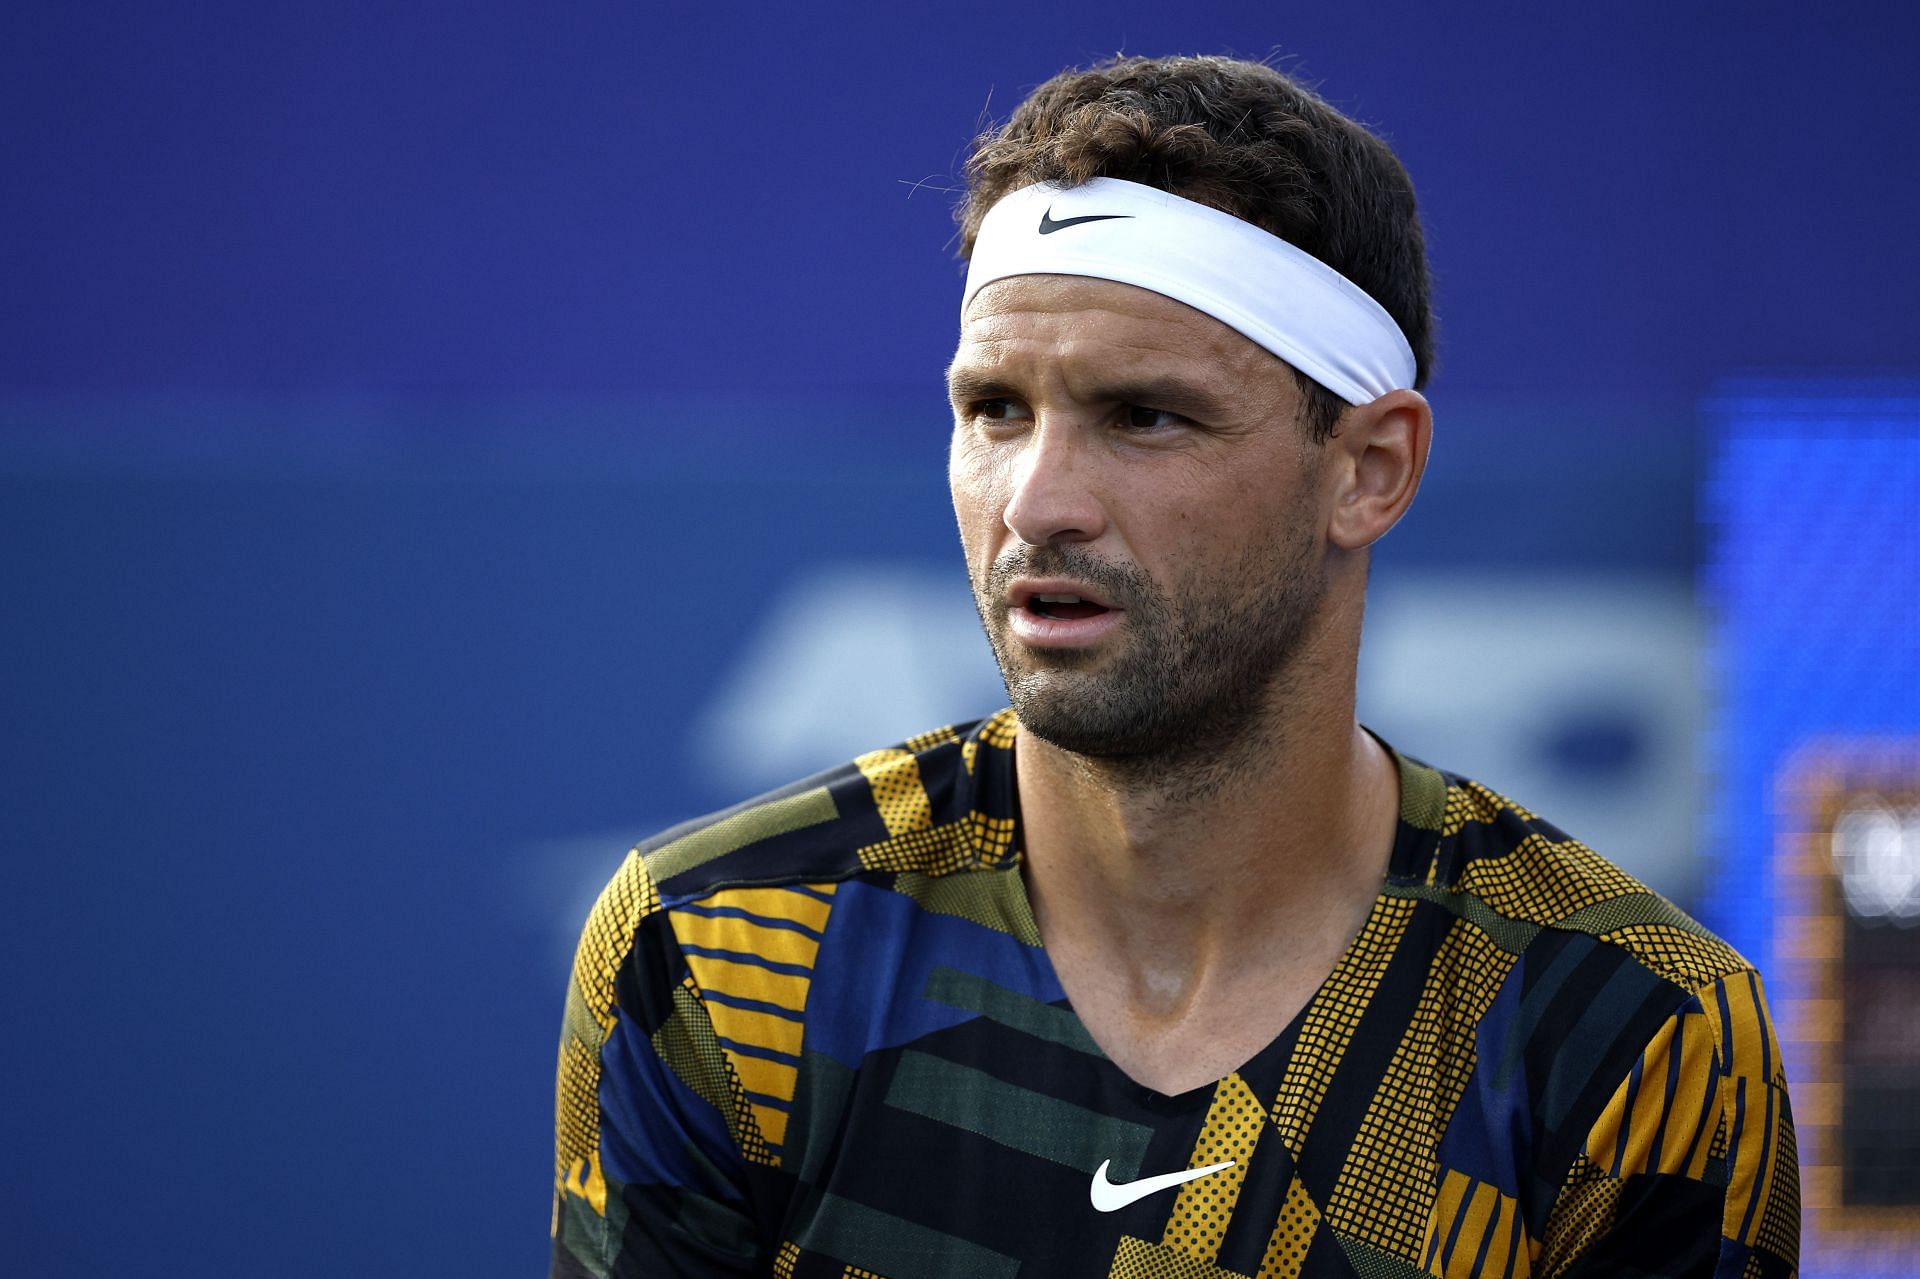 Grigor Dimitrov looks on during his second-round match at the Winston-Salem Open